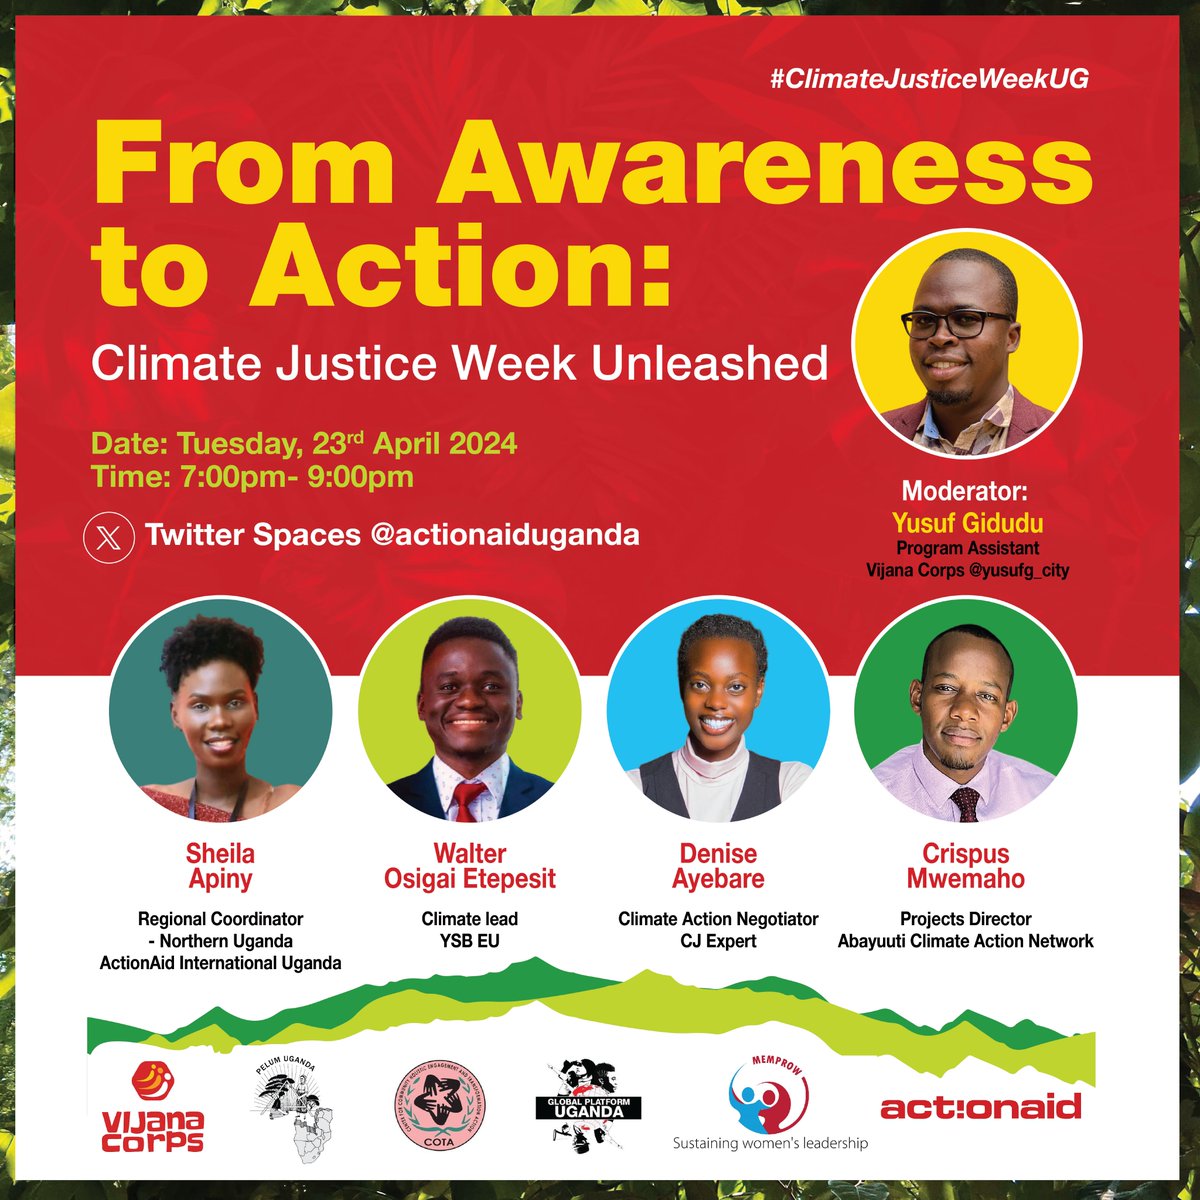 It is time to stand up for climate justice! Join us next week for an enlightening discussion as we host a Twitter Space on Climate Justice.@vijanacorps @MEMPROWUganda @AyebareDenise @yusufGidudu @Sheila184876117 #ClimateJusticeNow #FundOurFuture #ClimateJusticeWeekUG